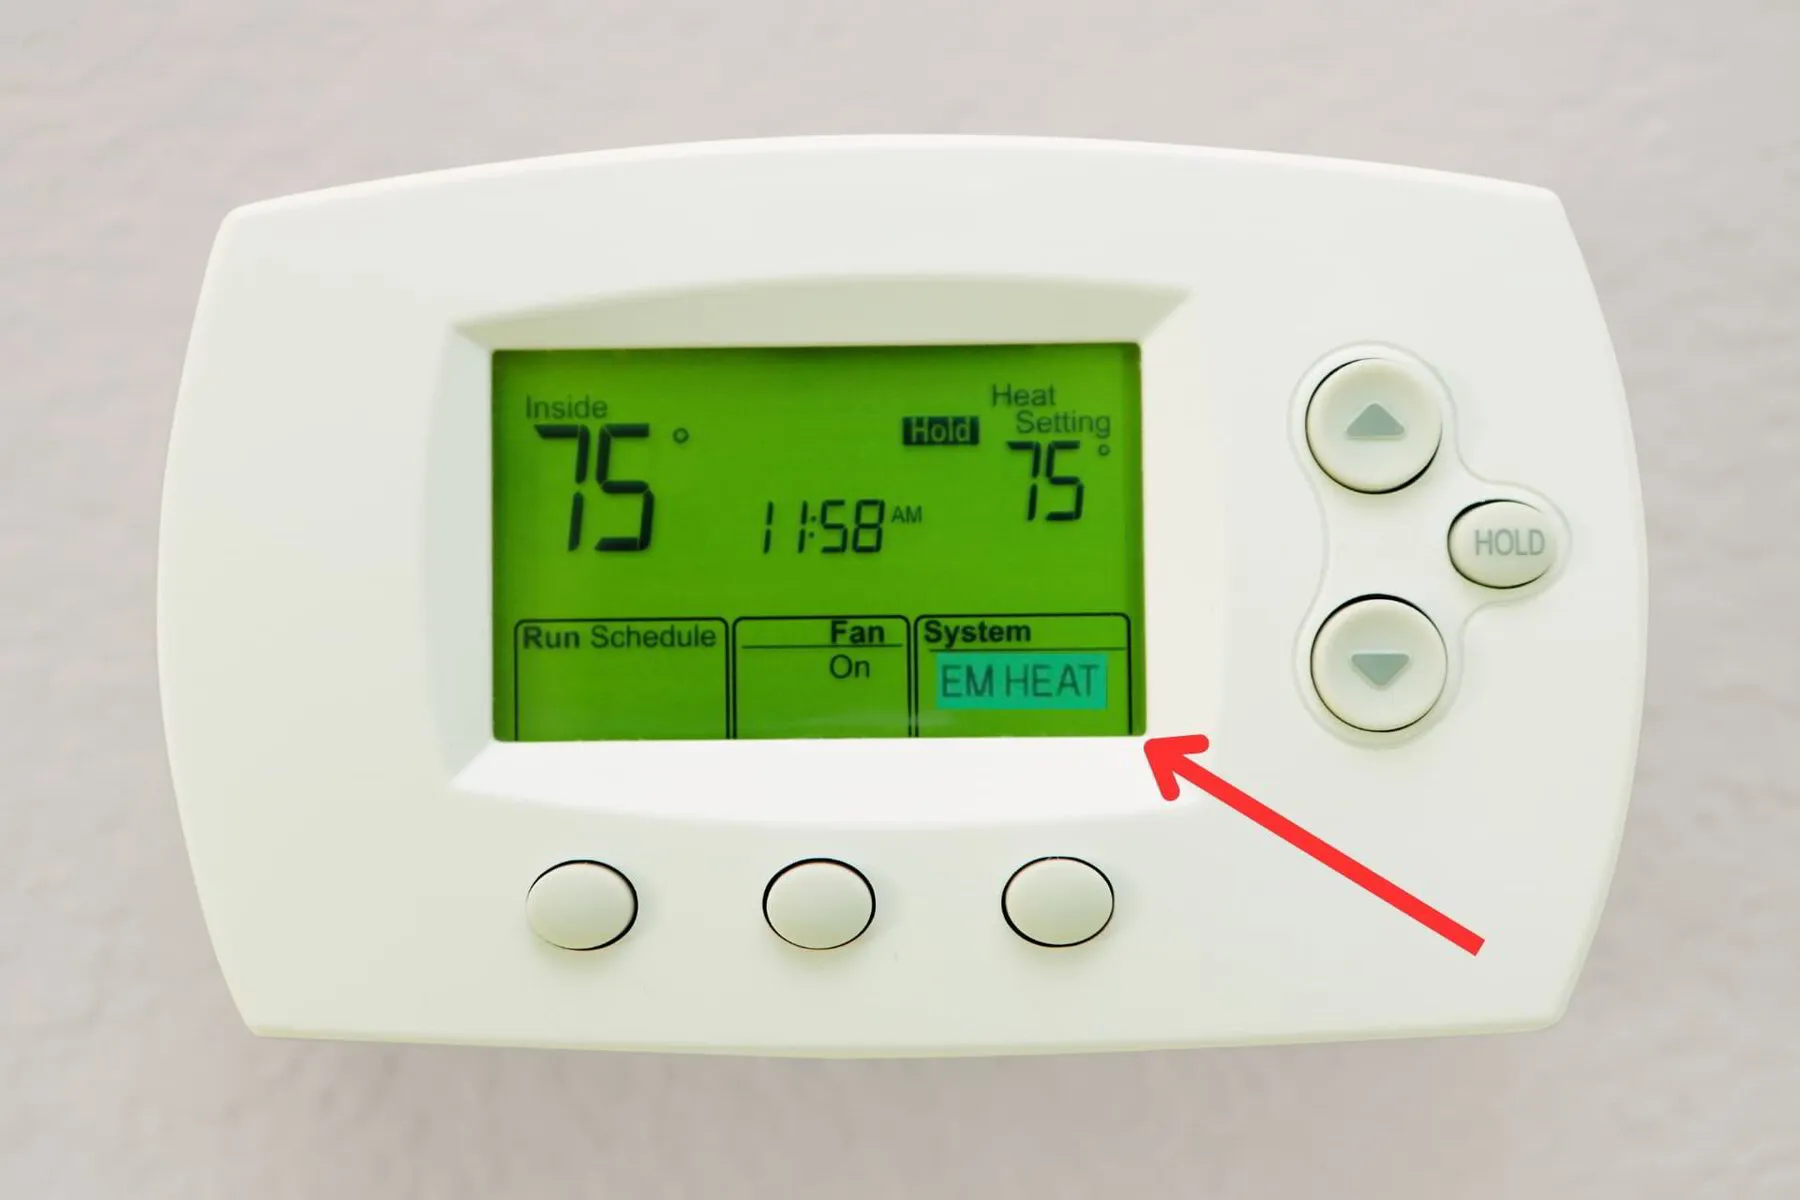 Thermostat showing EM heat is switched on